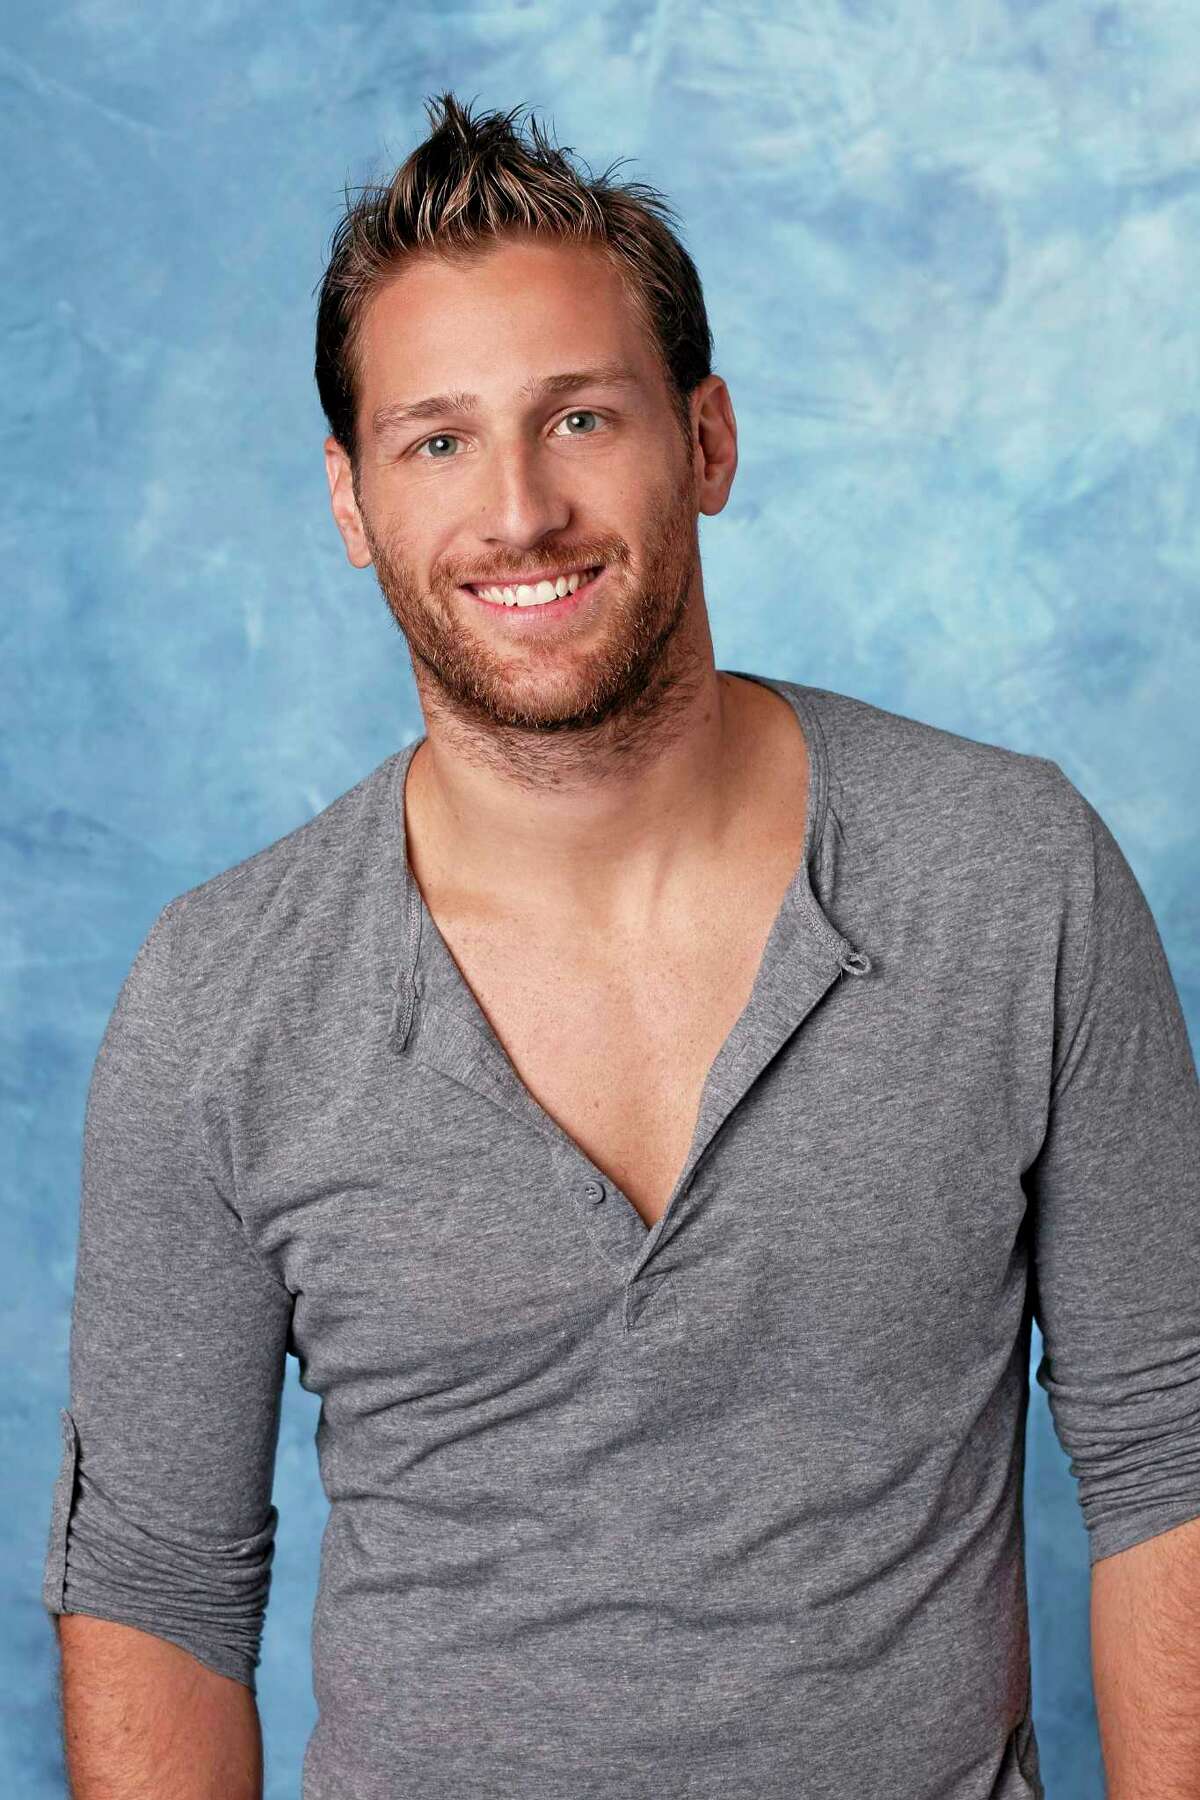 This March 2013 publicity photo released by ABC shows Juan Pablo Galavis, a contestant on the past season of “The Bachelorette.” Galavis made anti-gay comments that drew a swift rebuke from the network and an apology from the bachelor himself.